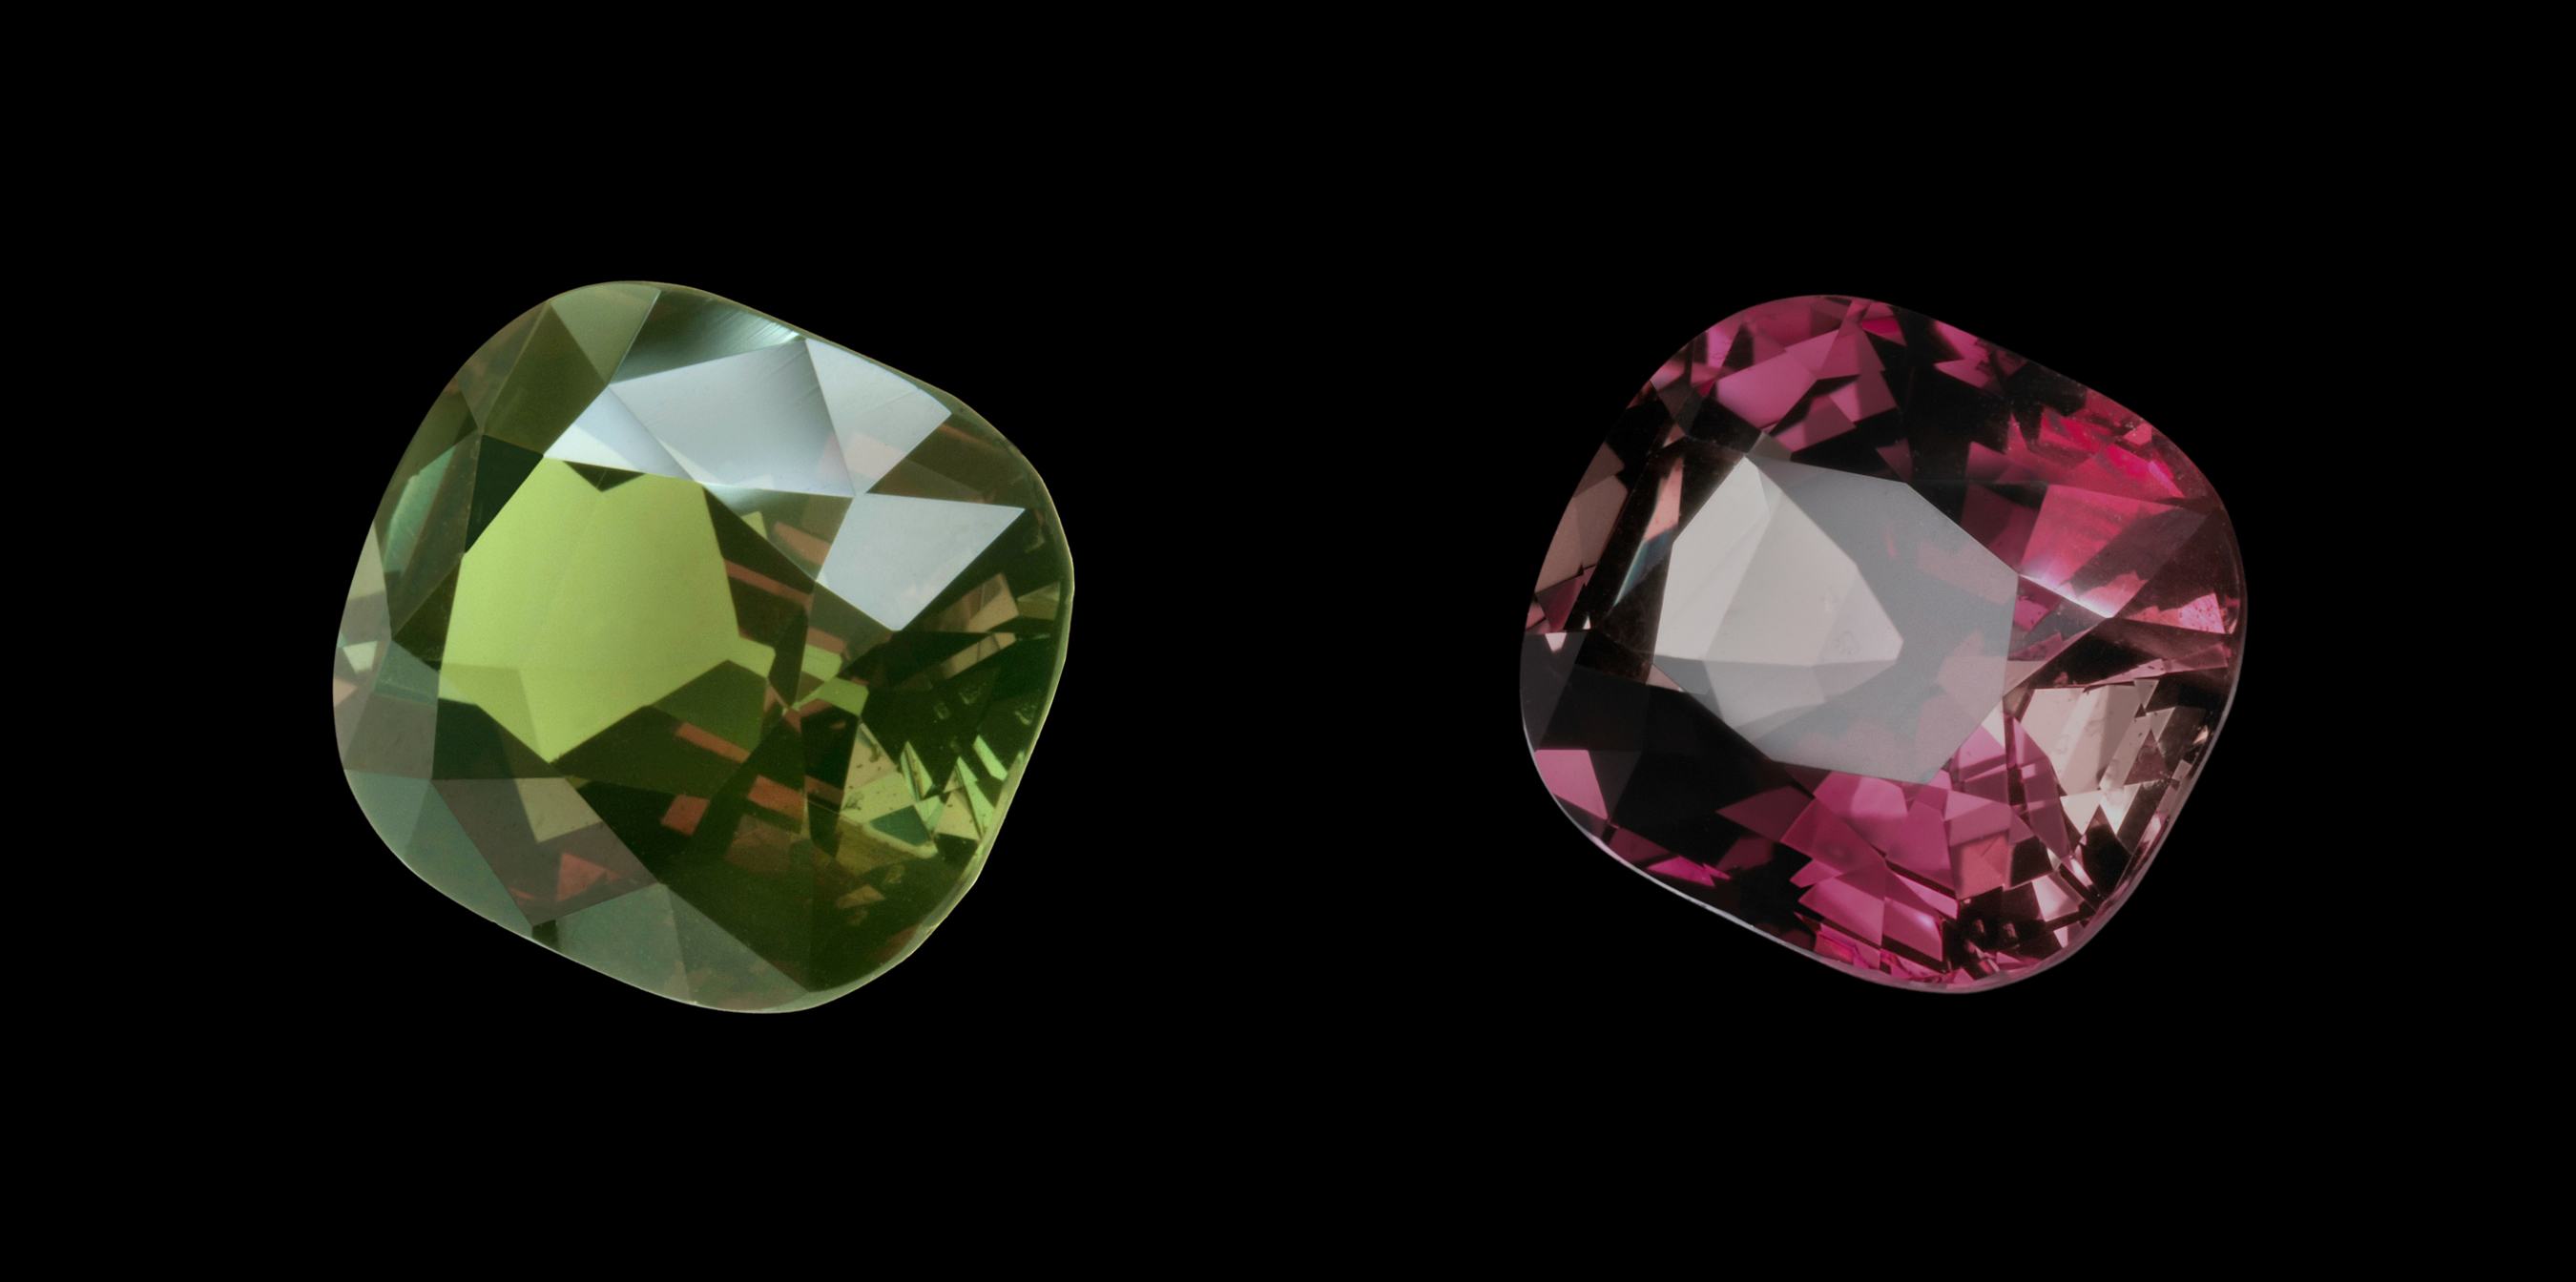 A faceted alexandrite gem weighing 11.65 carats showing the green/red color-change characteristic of this gem variety.The green color is in daylight (left) and the red is in incandescent light (right),both the same stone. This stone is 14 mm in height.